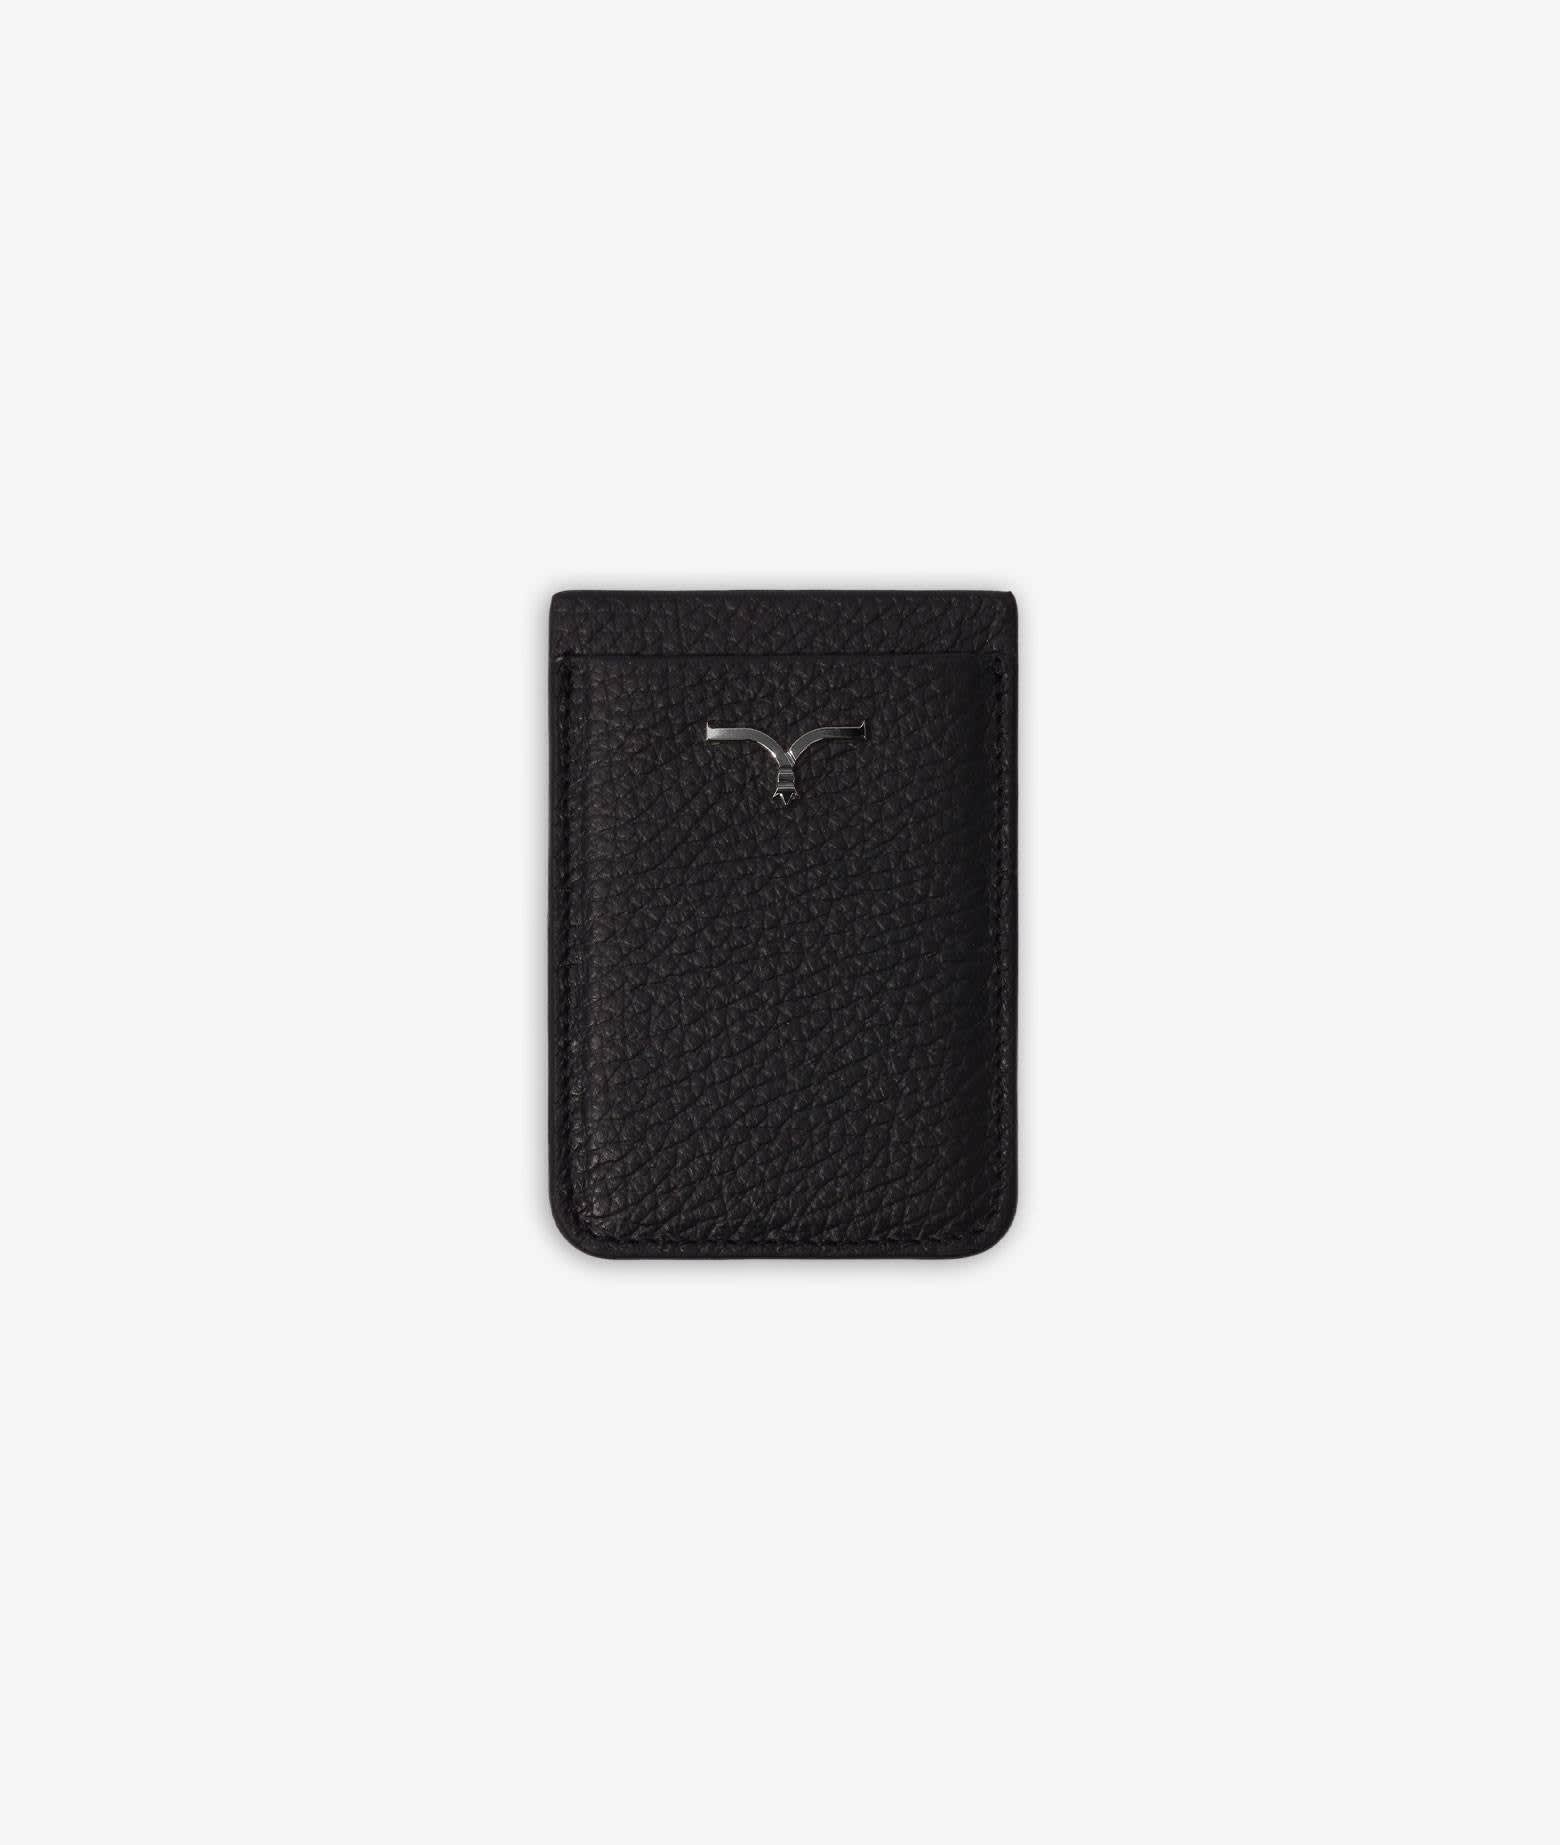 Larusmiani Magnetic Credit Card Holder For Iphone Accessory In Black